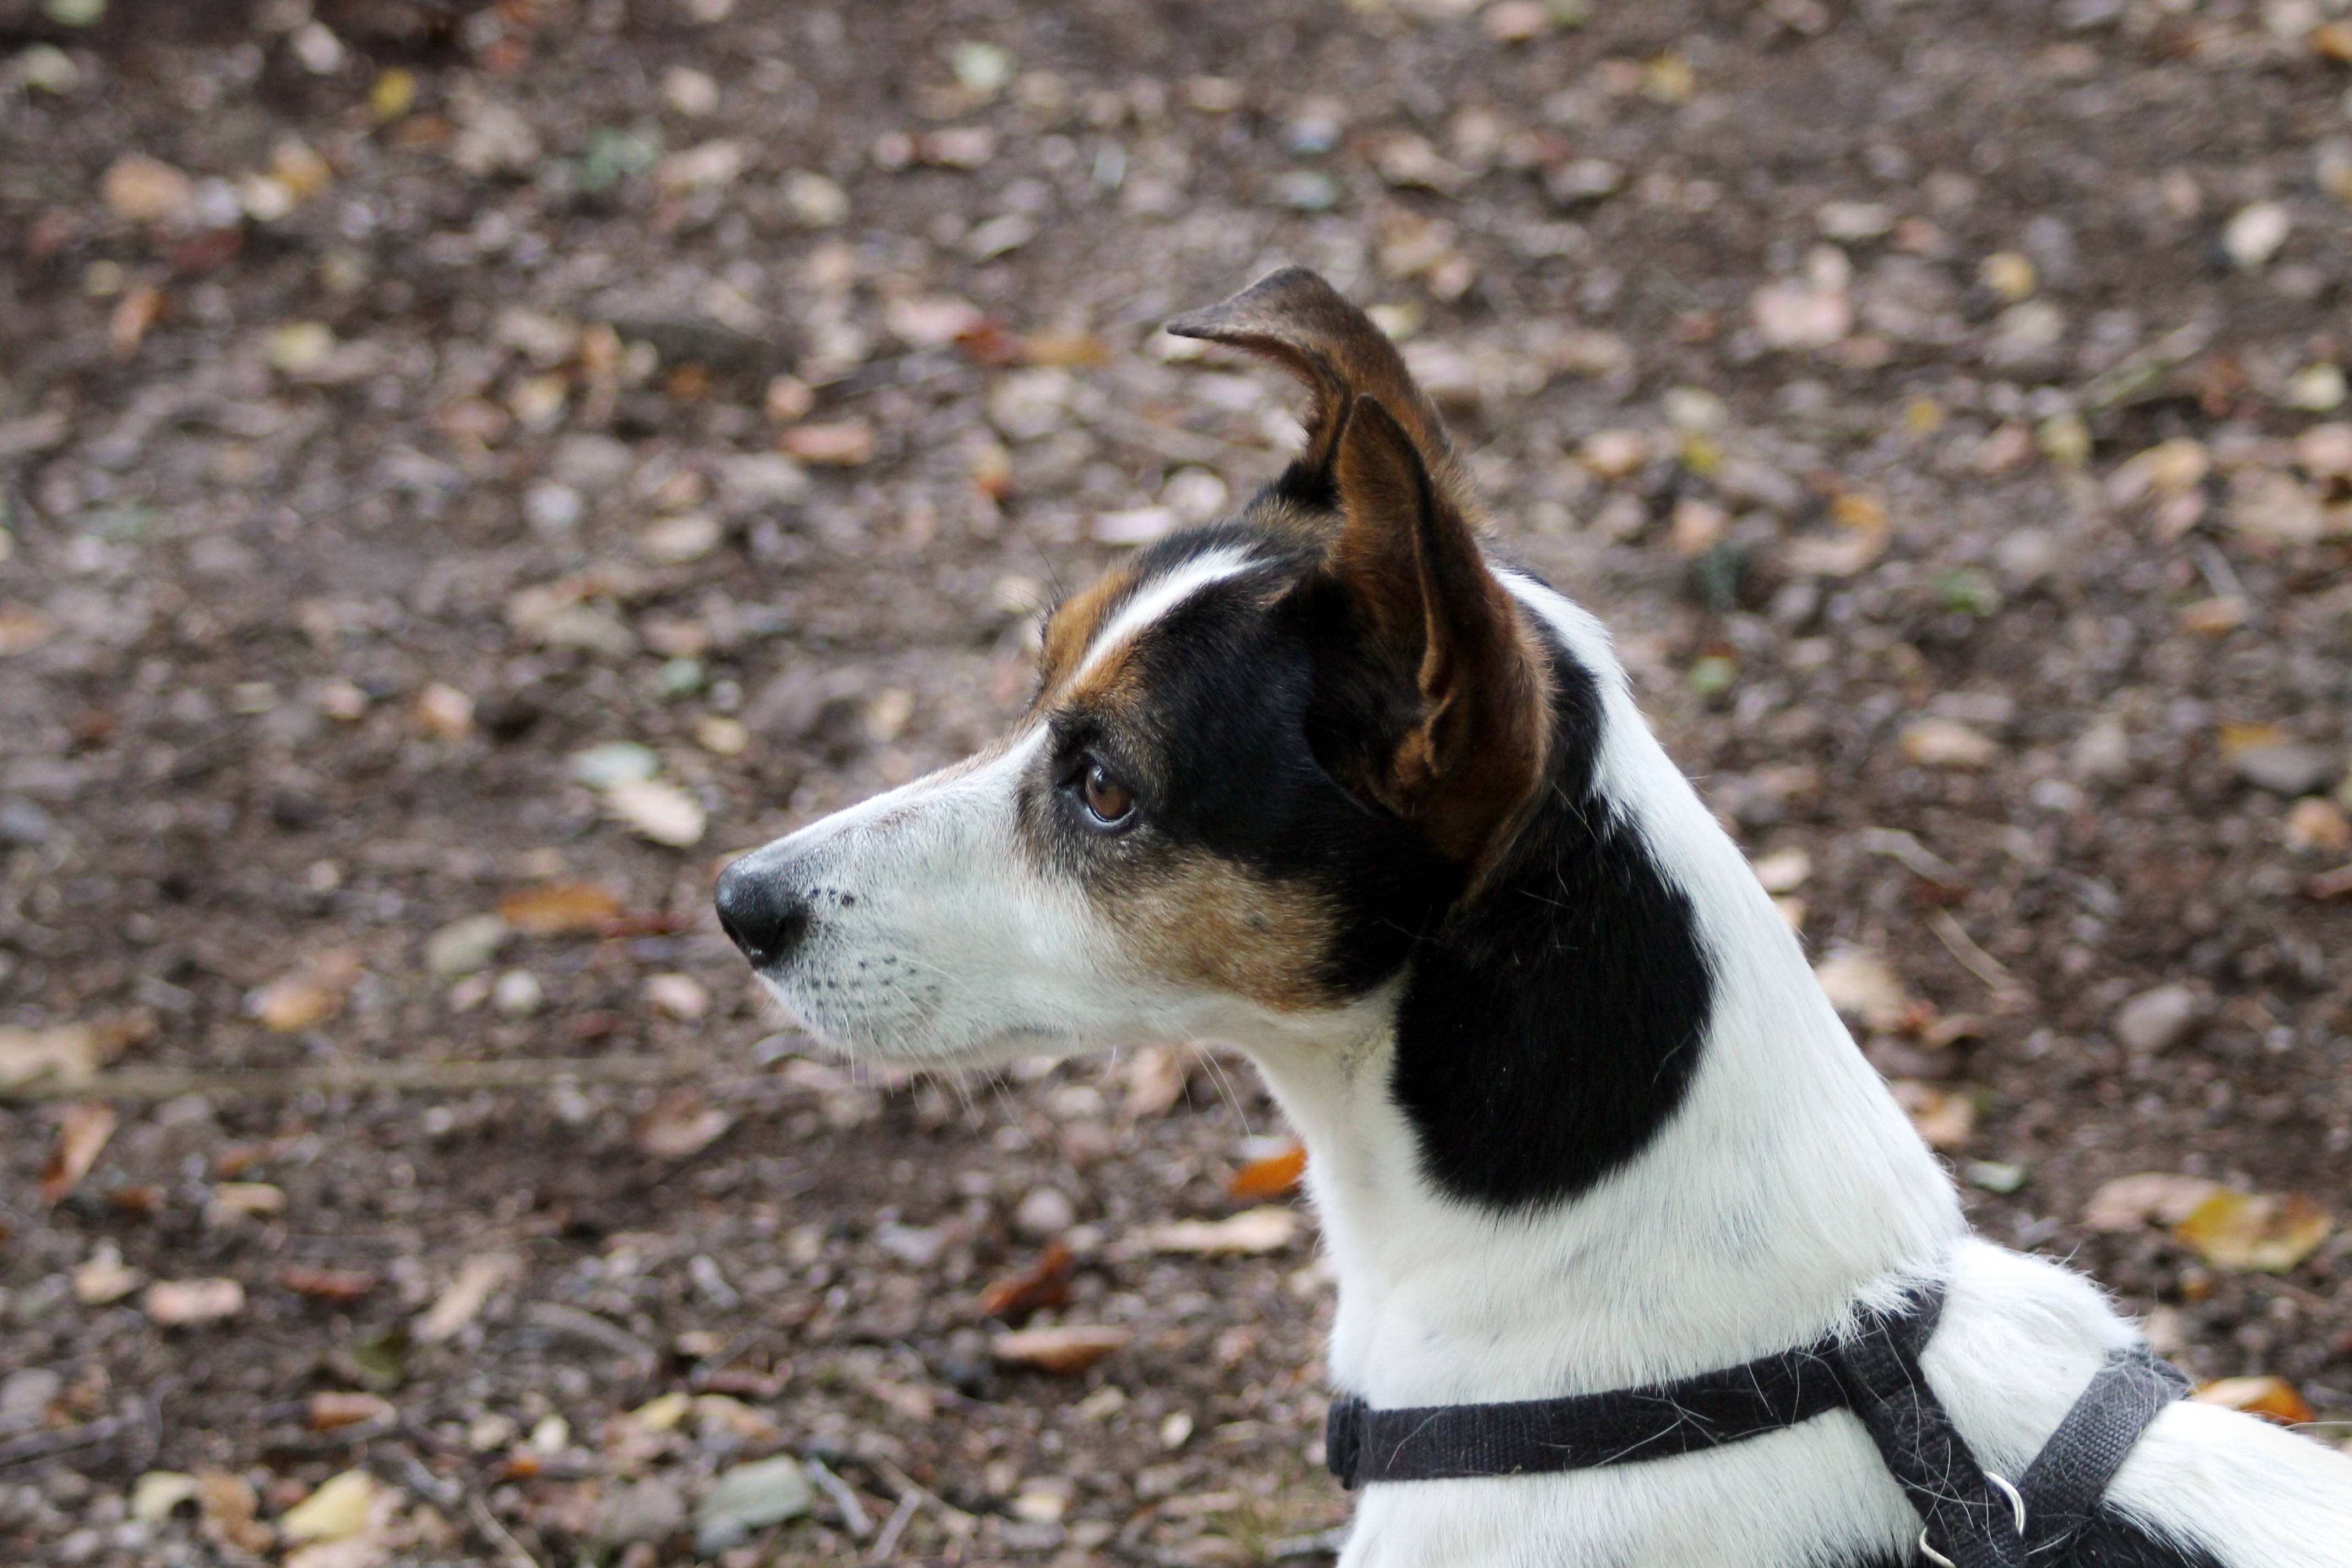 White Black And Brown Short Hair Coated Dog On Brown Soil Free